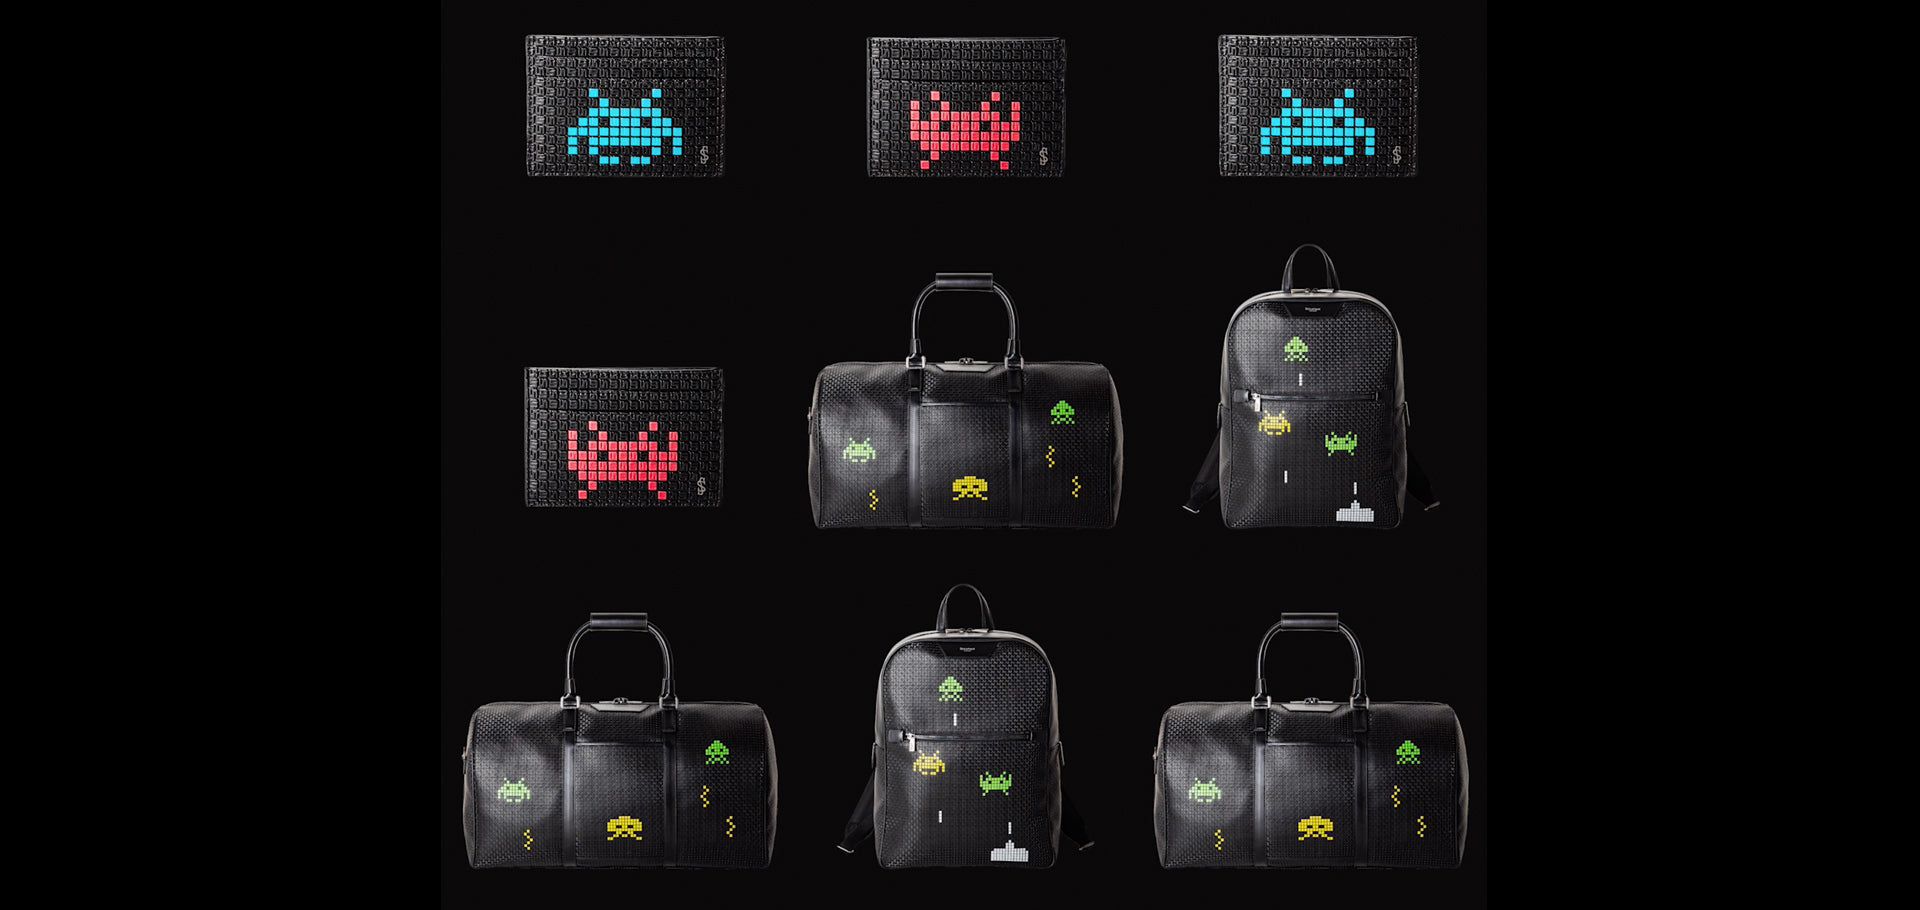 Serapian X Space Invaders - Limited-edition Collection With the Iconic Arcade Game